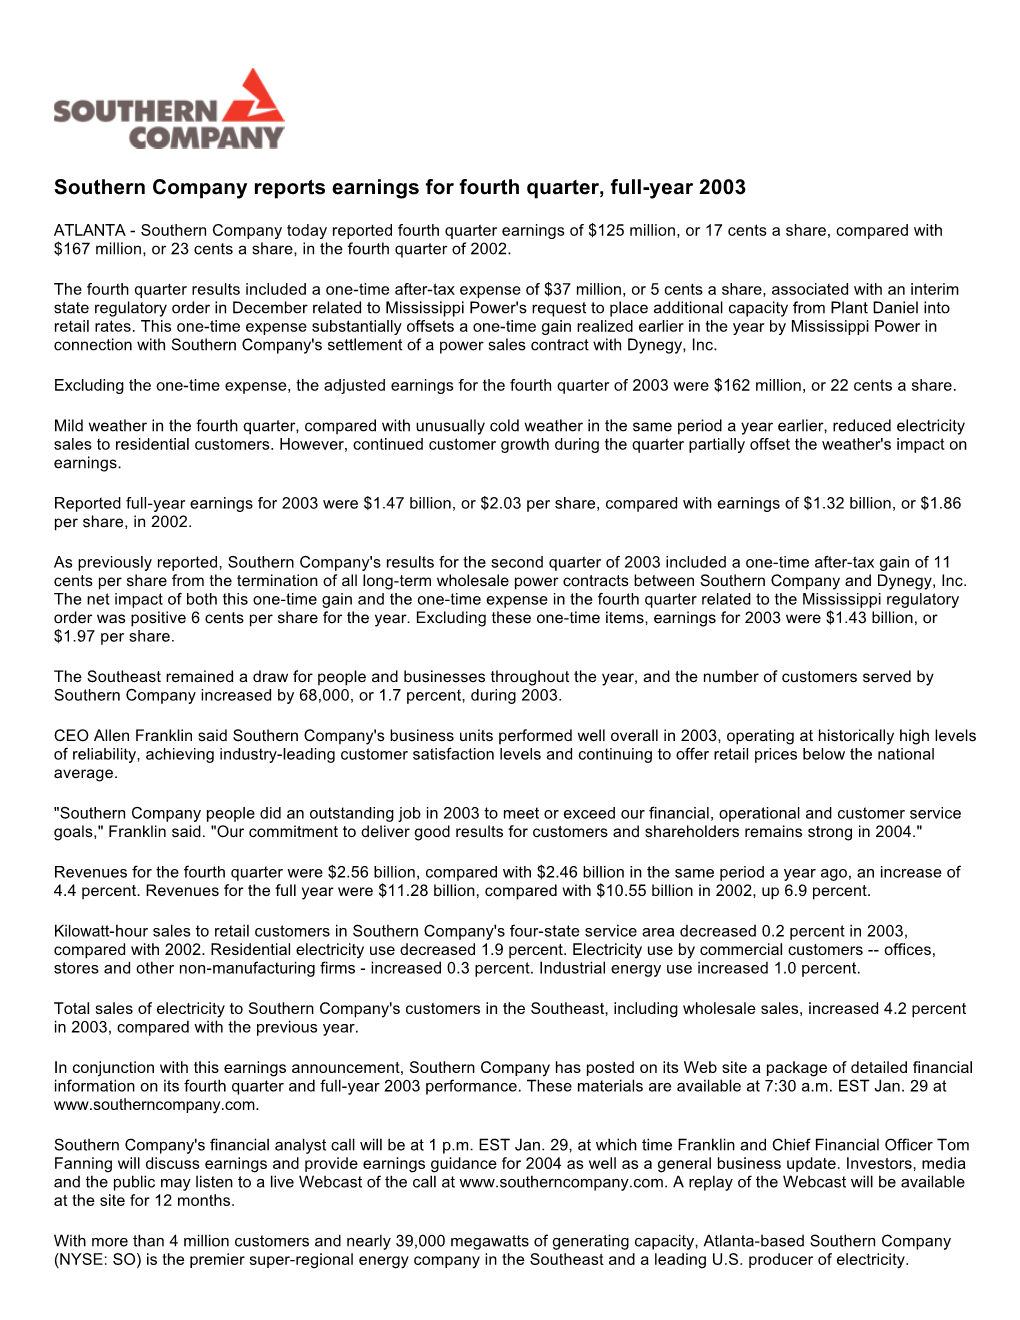 Southern Company Reports Earnings for Fourth Quarter, Full-Year 2003